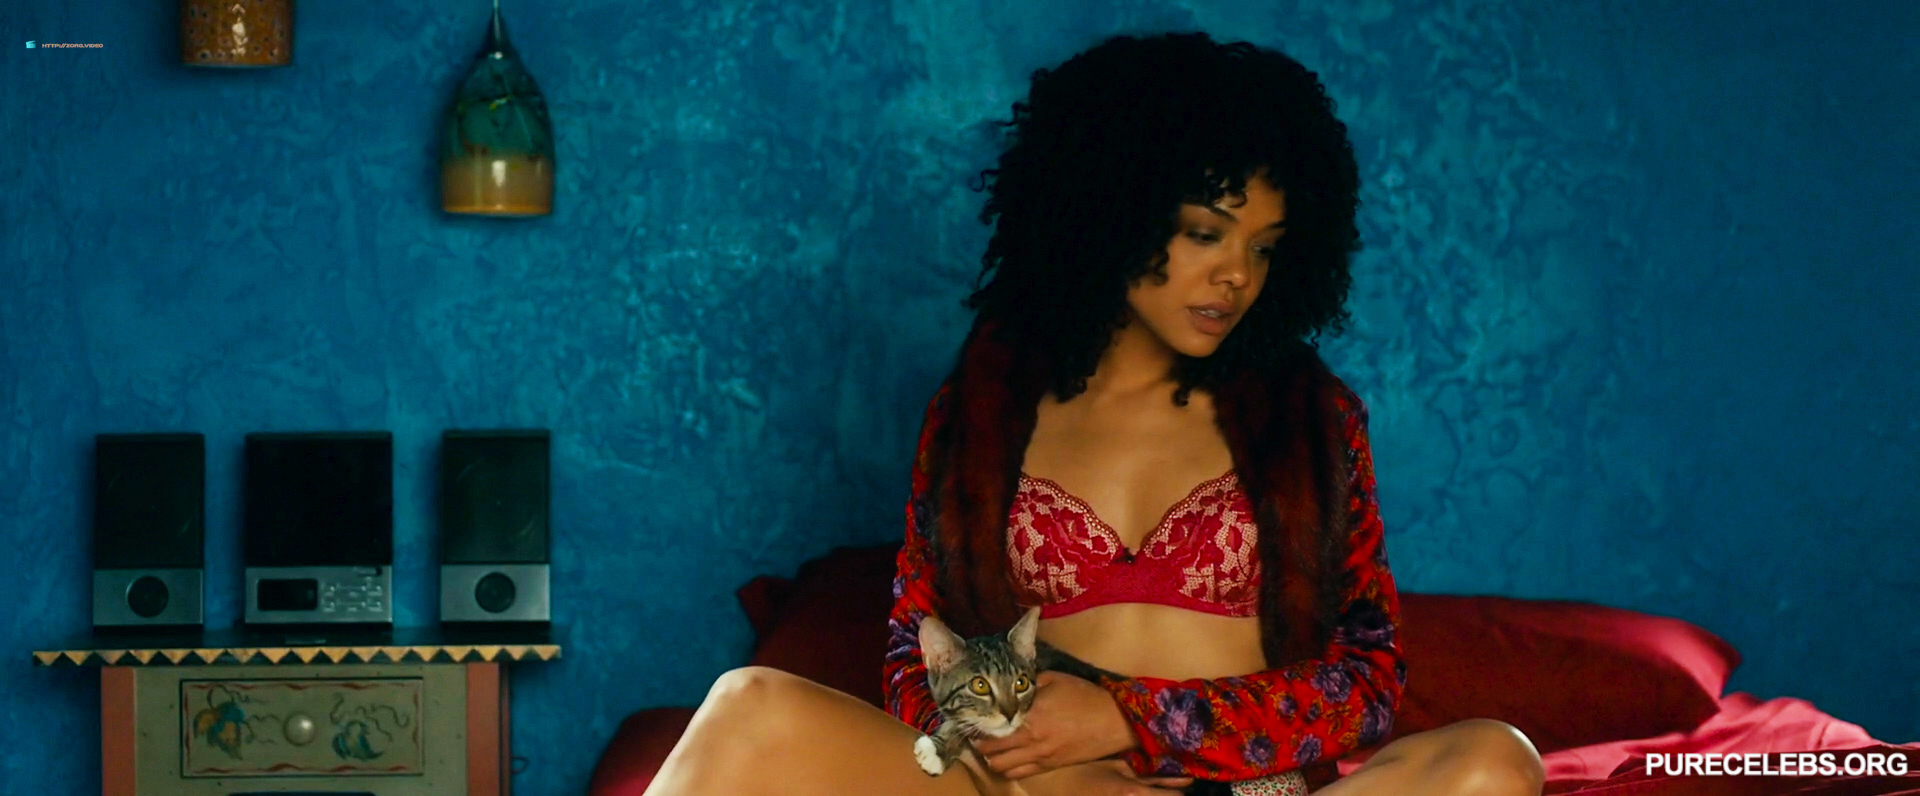 American actress Tessa Thompson starred in the hottest nude scenes in the m...